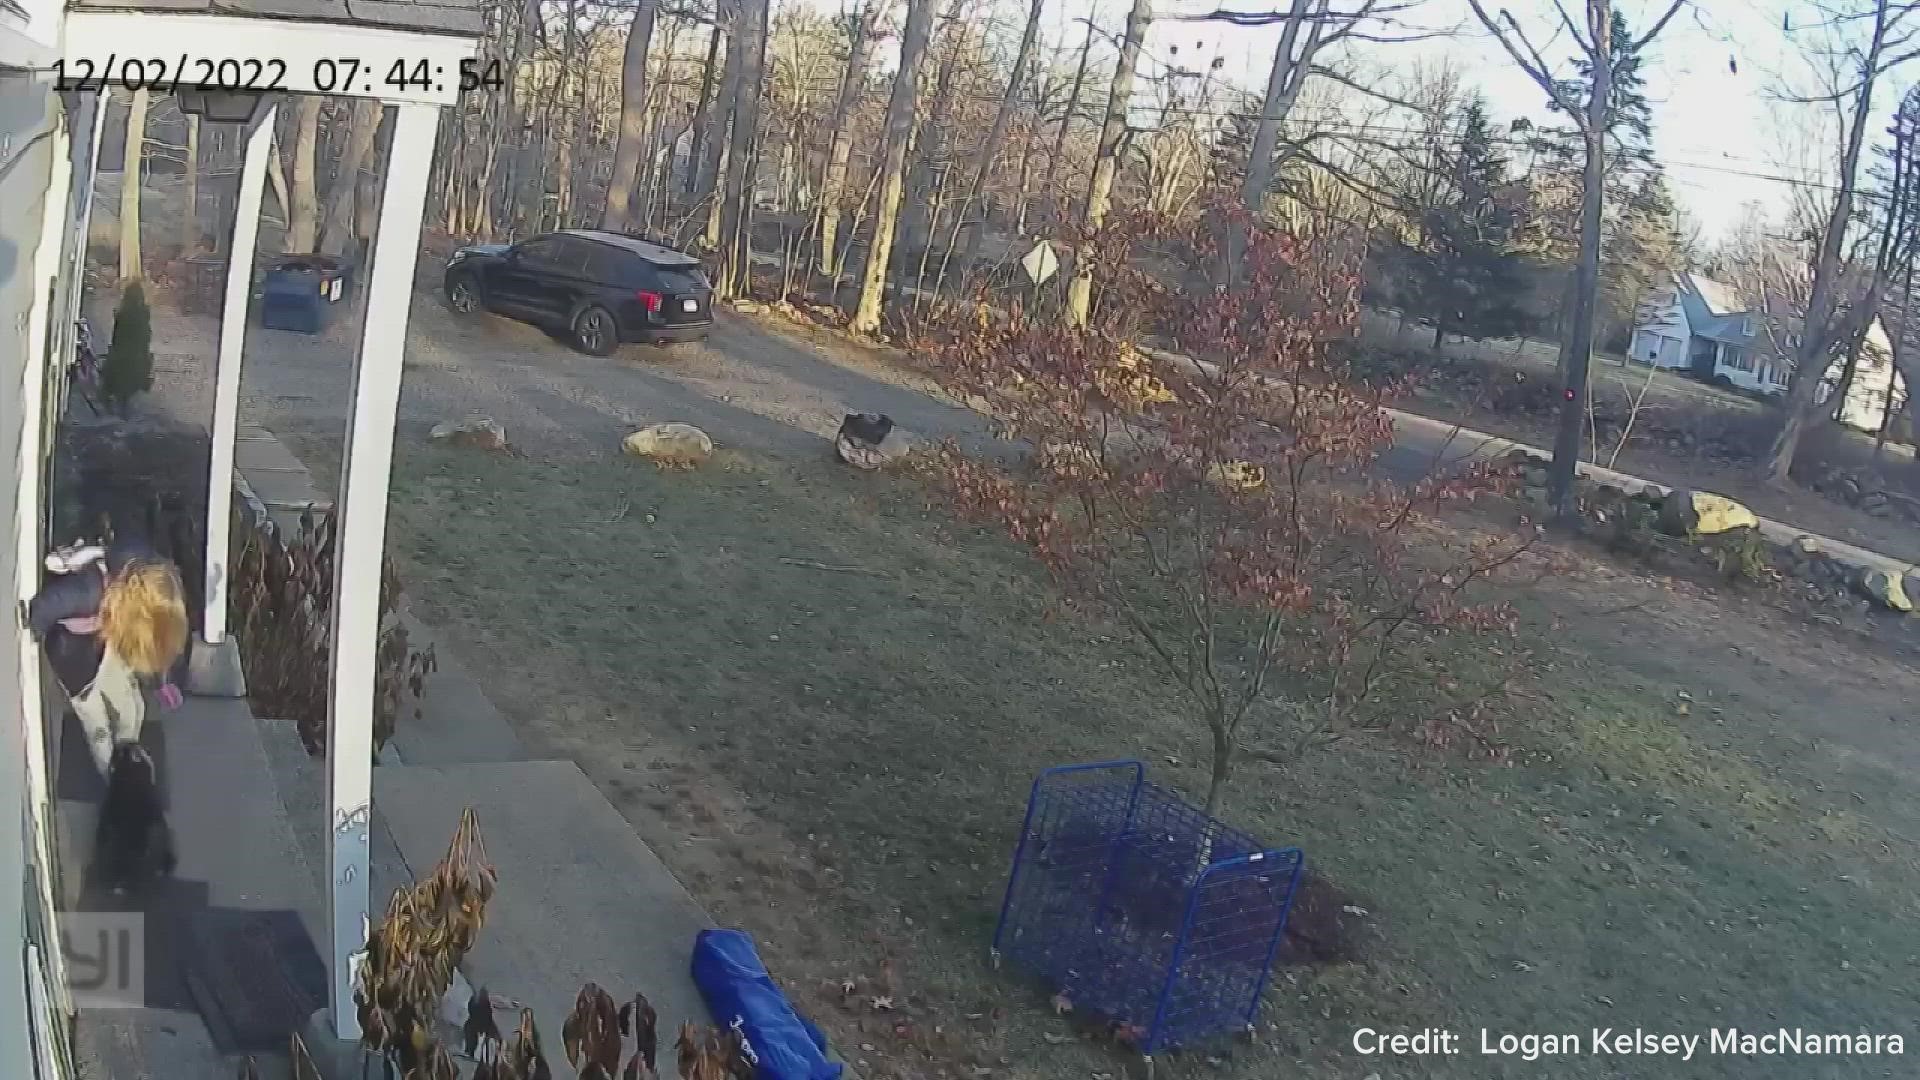 A video capturing the moment a raccoon attacked a girl in Ashford on Friday morning is going viral.